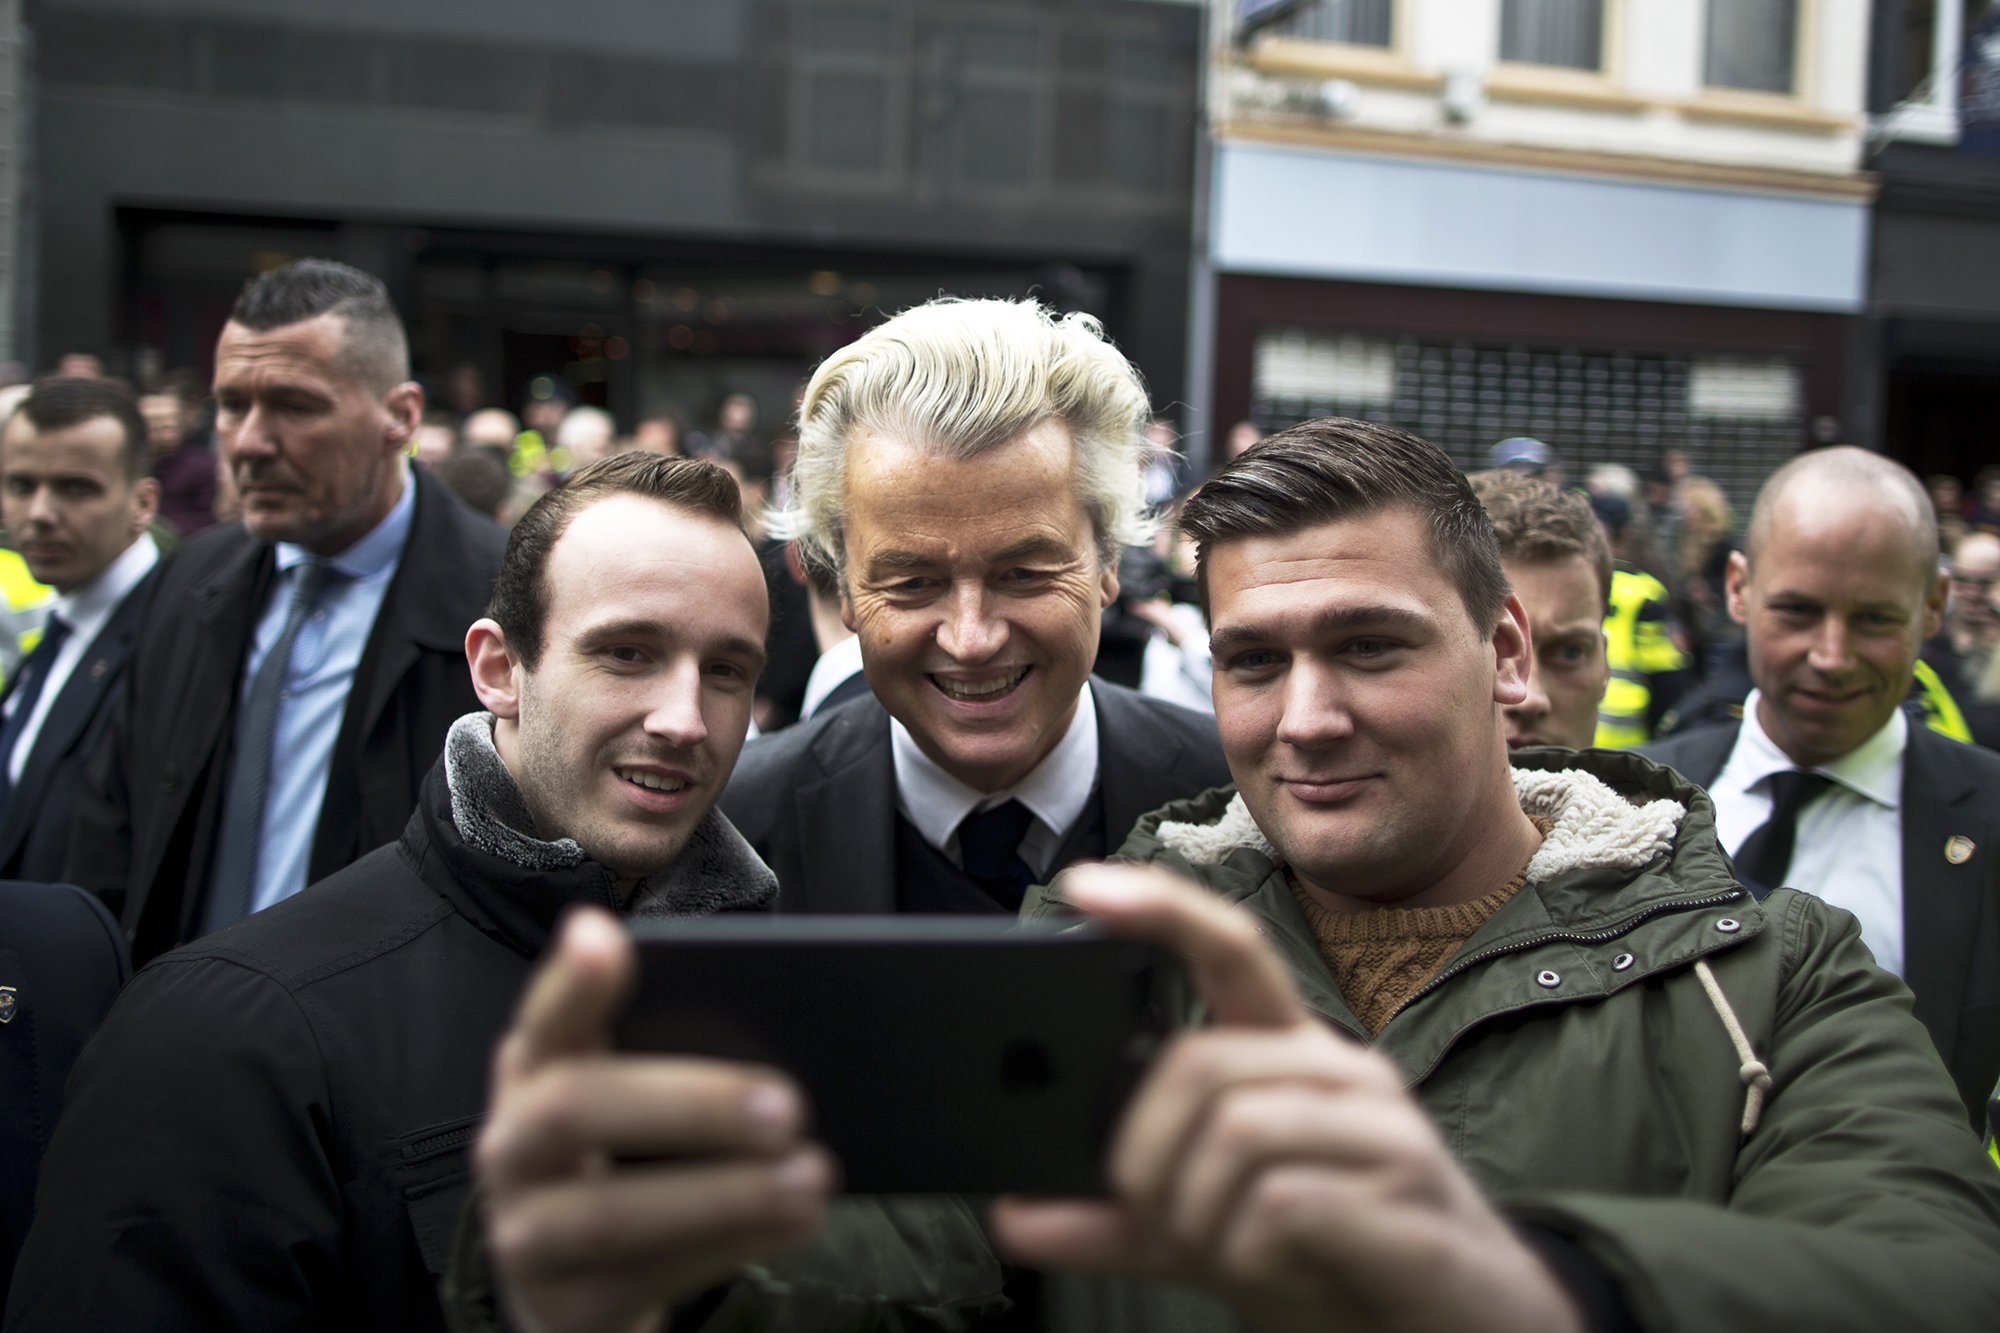 Firebrand anti-Islam lawmaker Geert Wilders, poses for a selfie with supporters during a campaign stop in Heerlen, Netherlands, on March 11, 2017. (Muhammed Muheisen—AP)